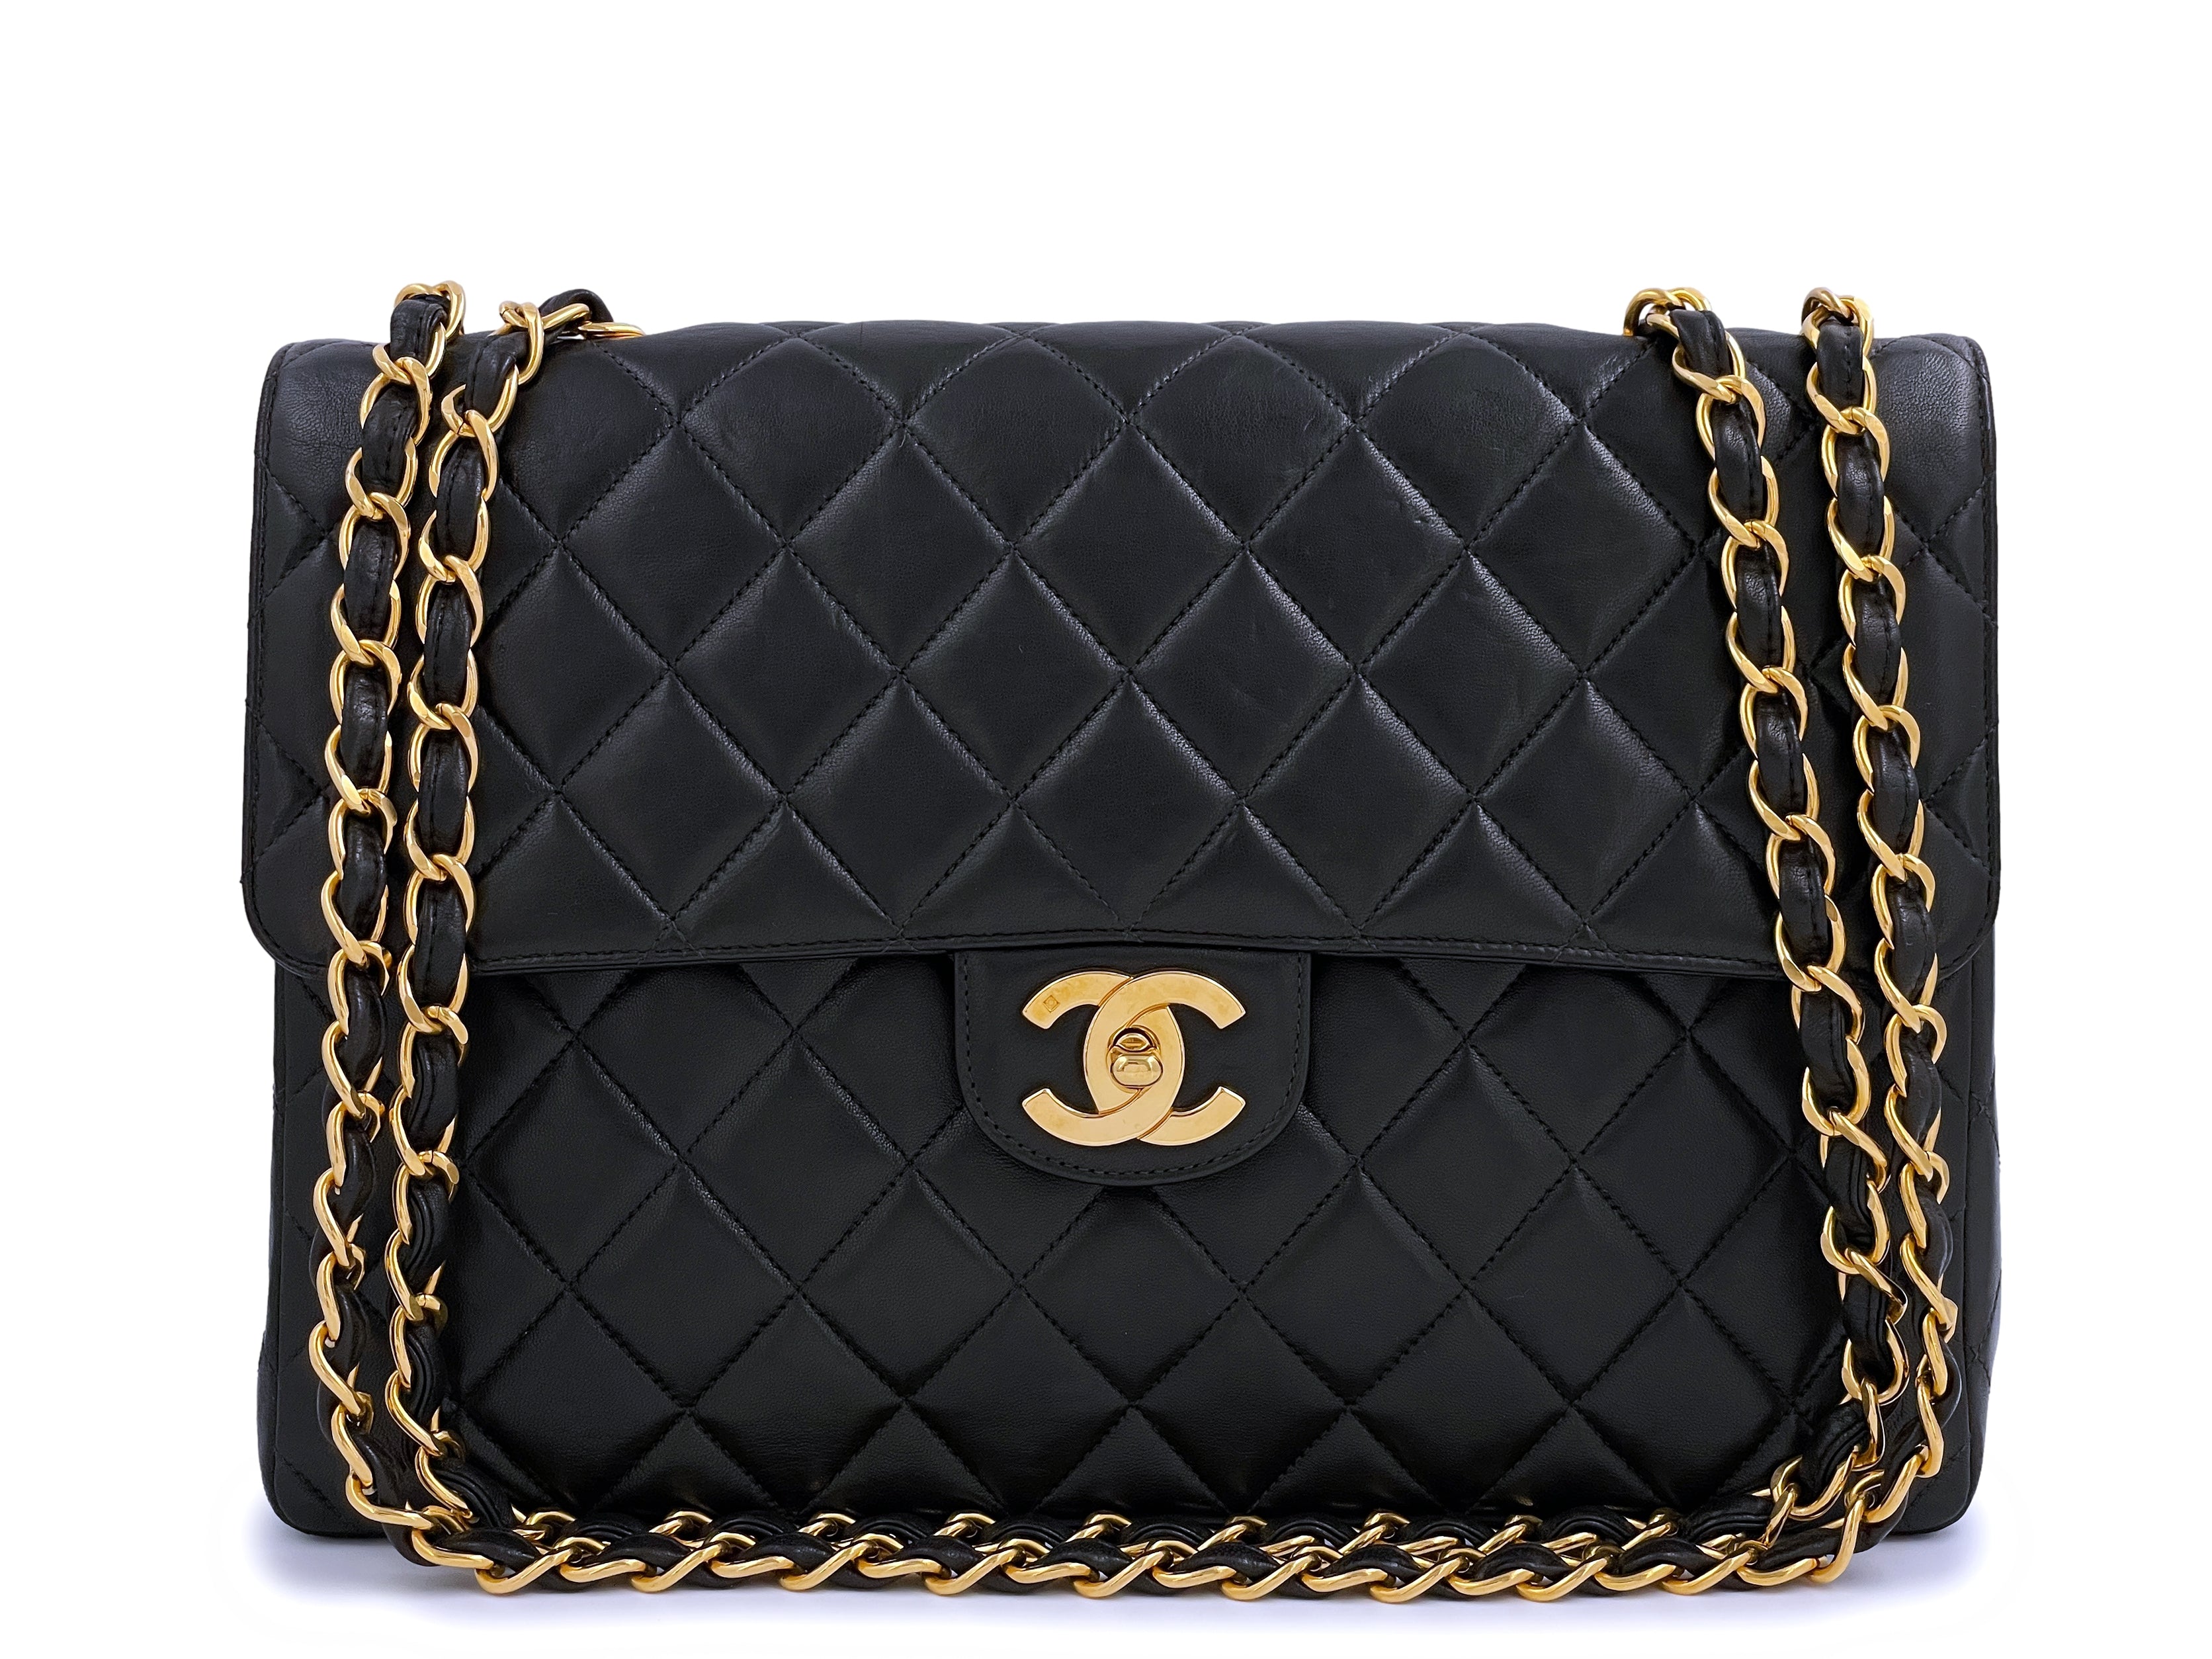 Vintage Chanel medium double flap bag  THE HOUSE OF WAUW